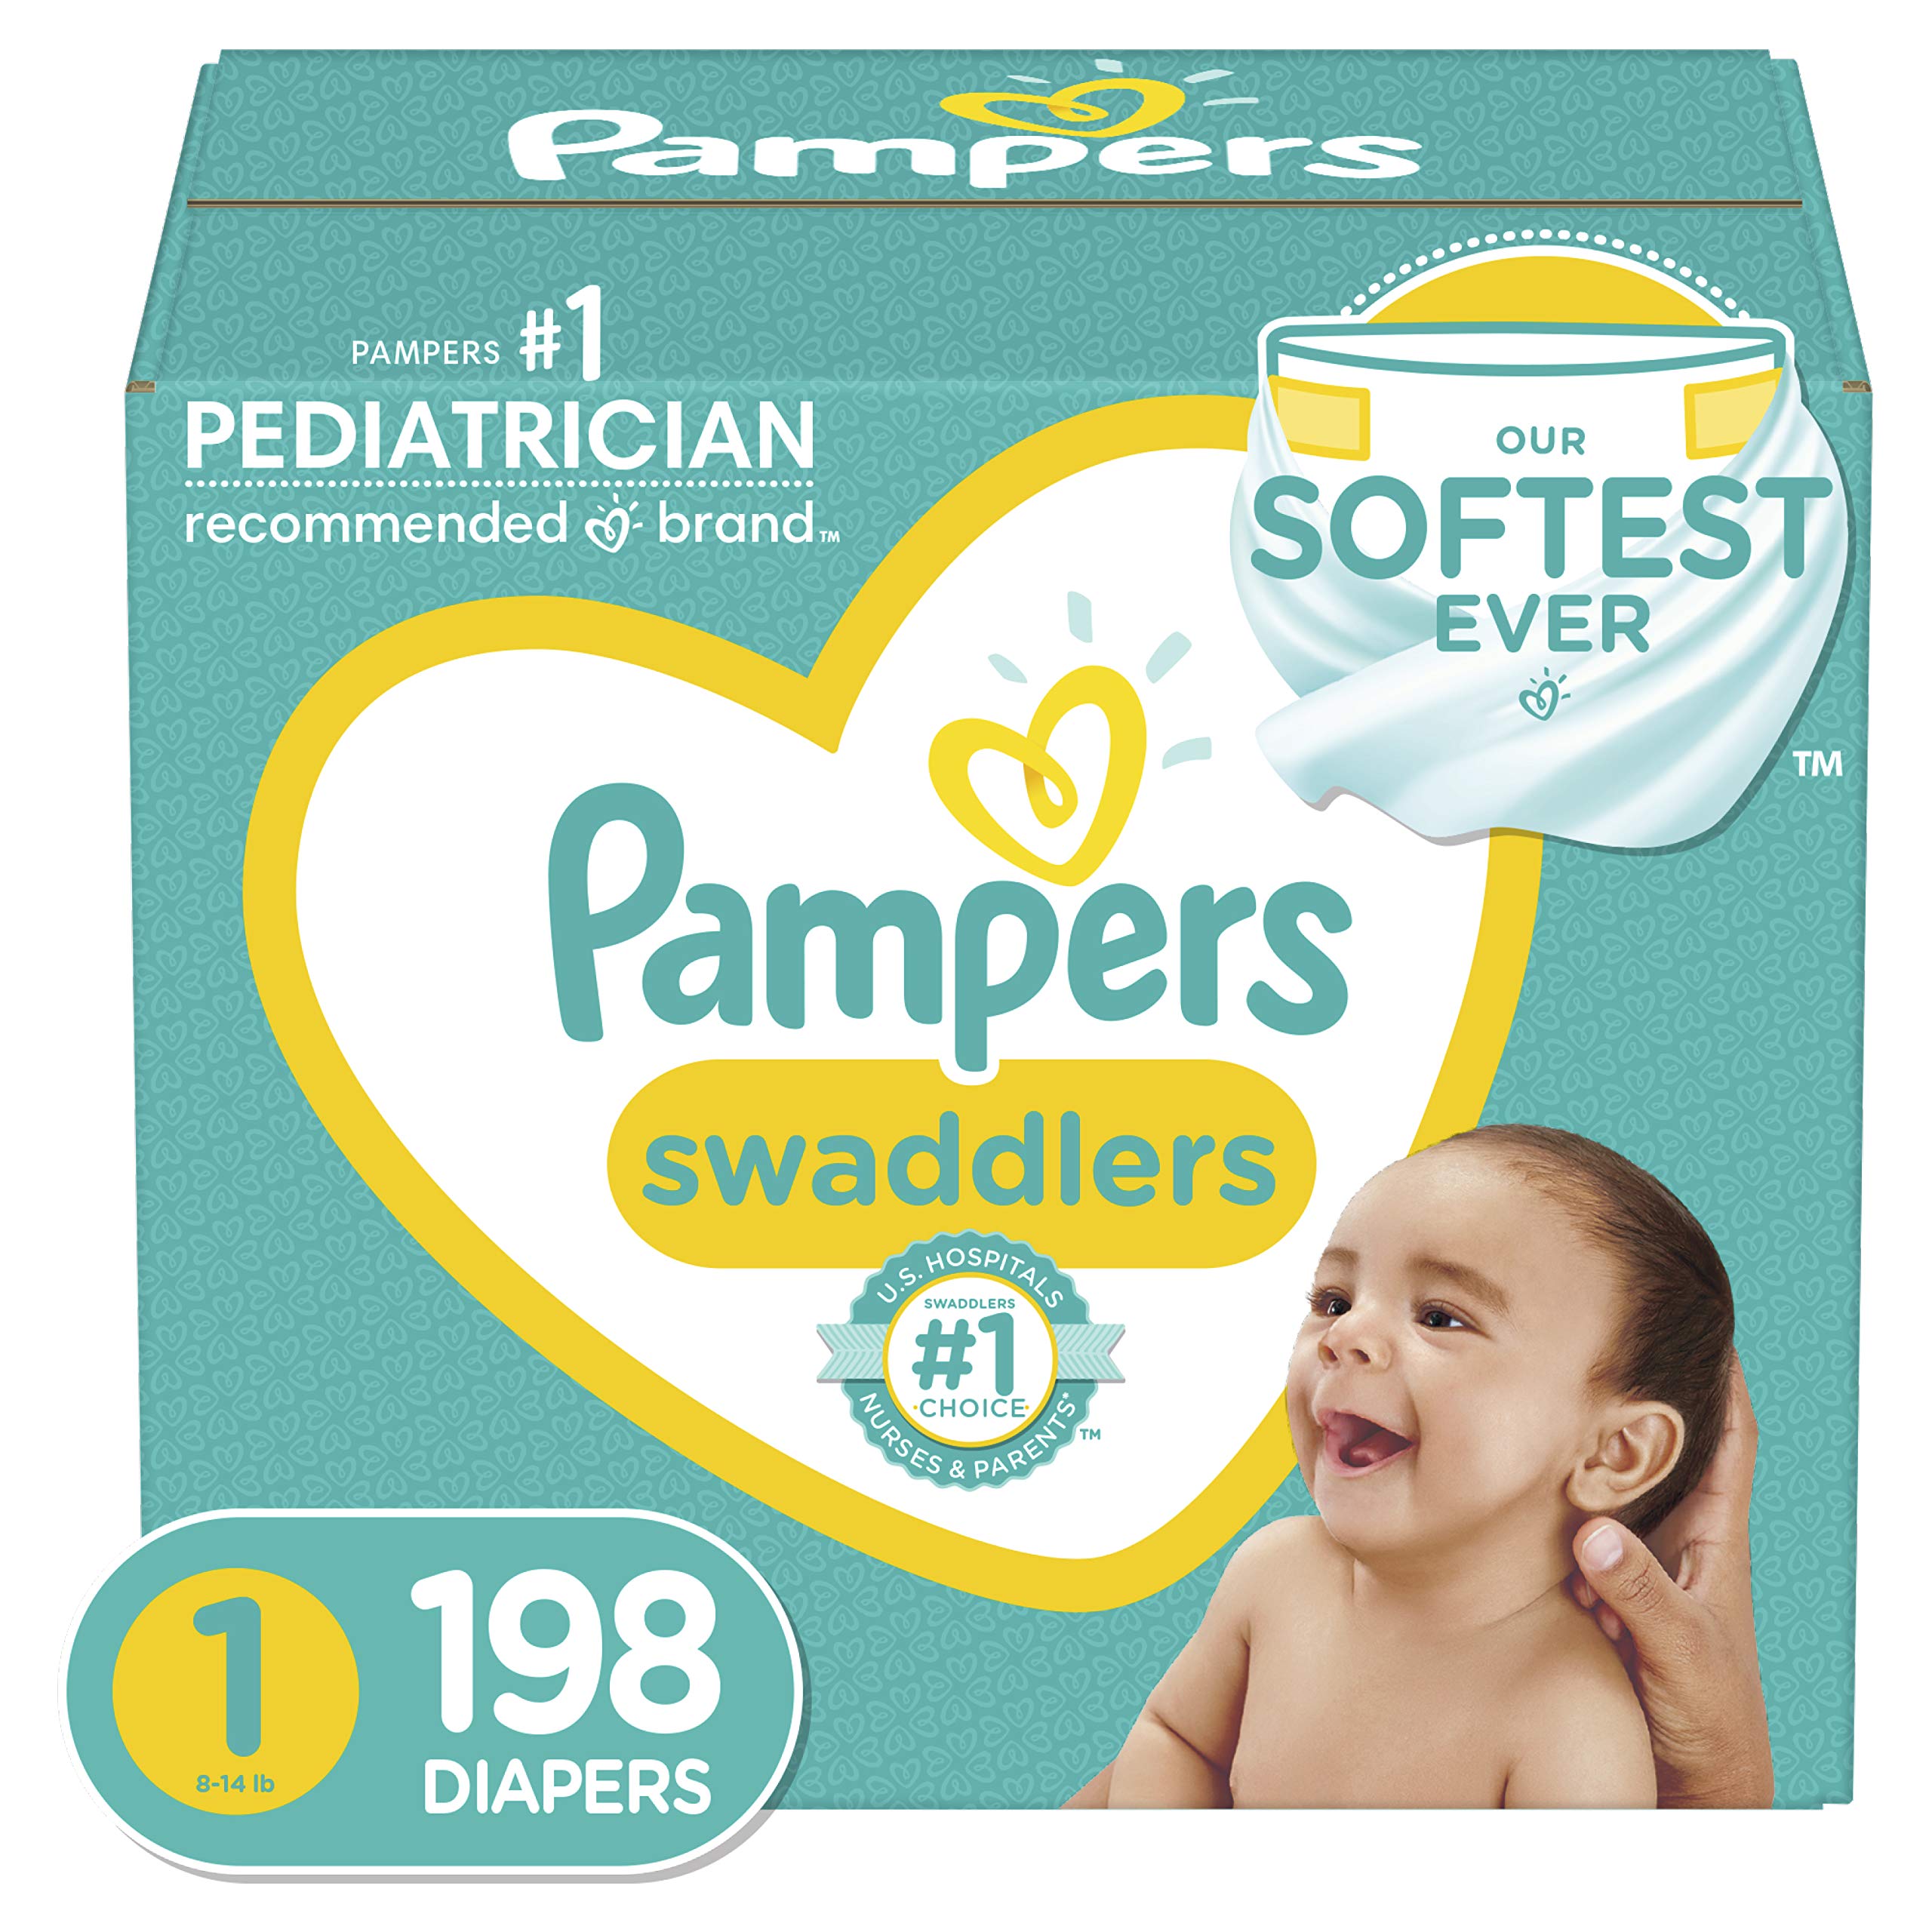 Pampers Diapers - 198 Diapers for new borns $44.29